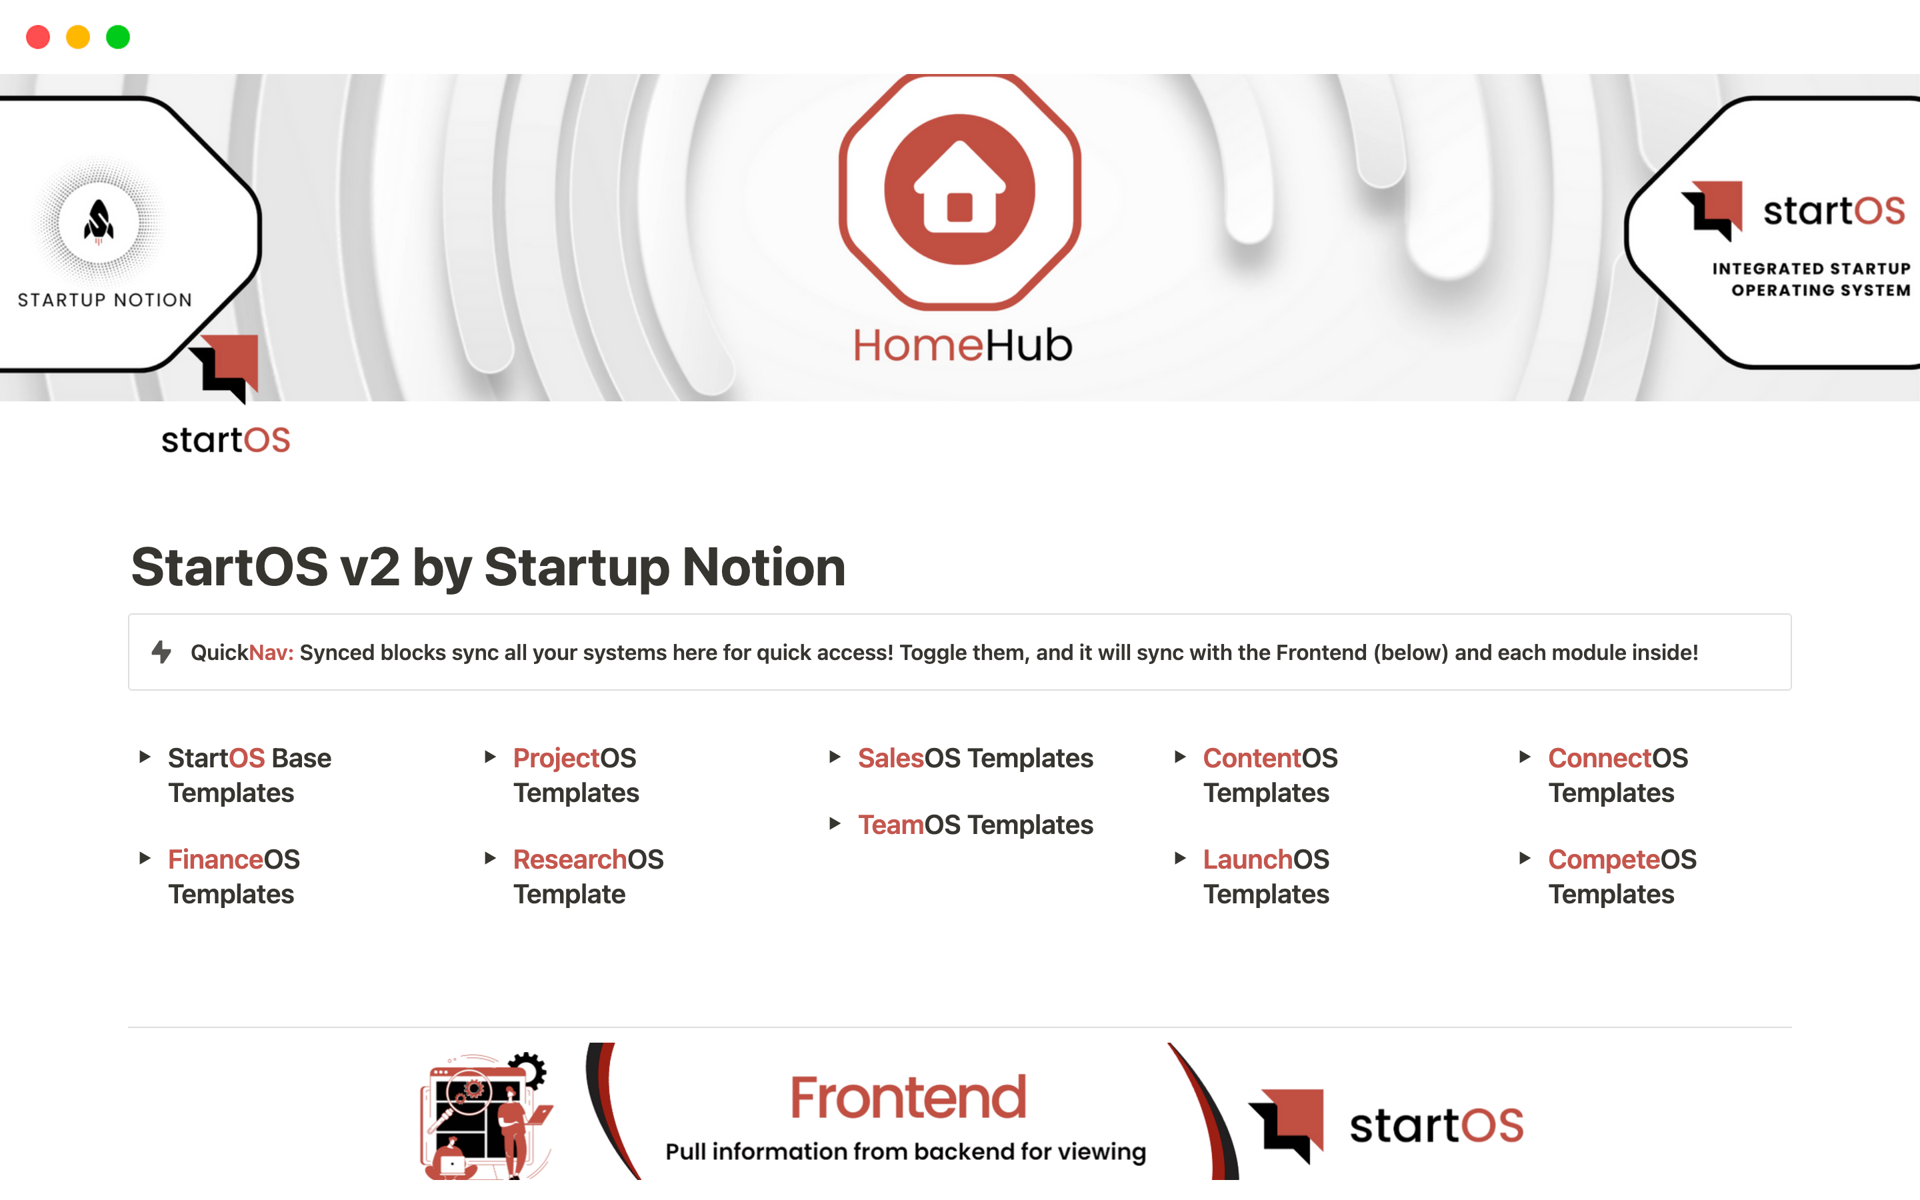 Plug-and-play system for startups, with 9 integrated modules.